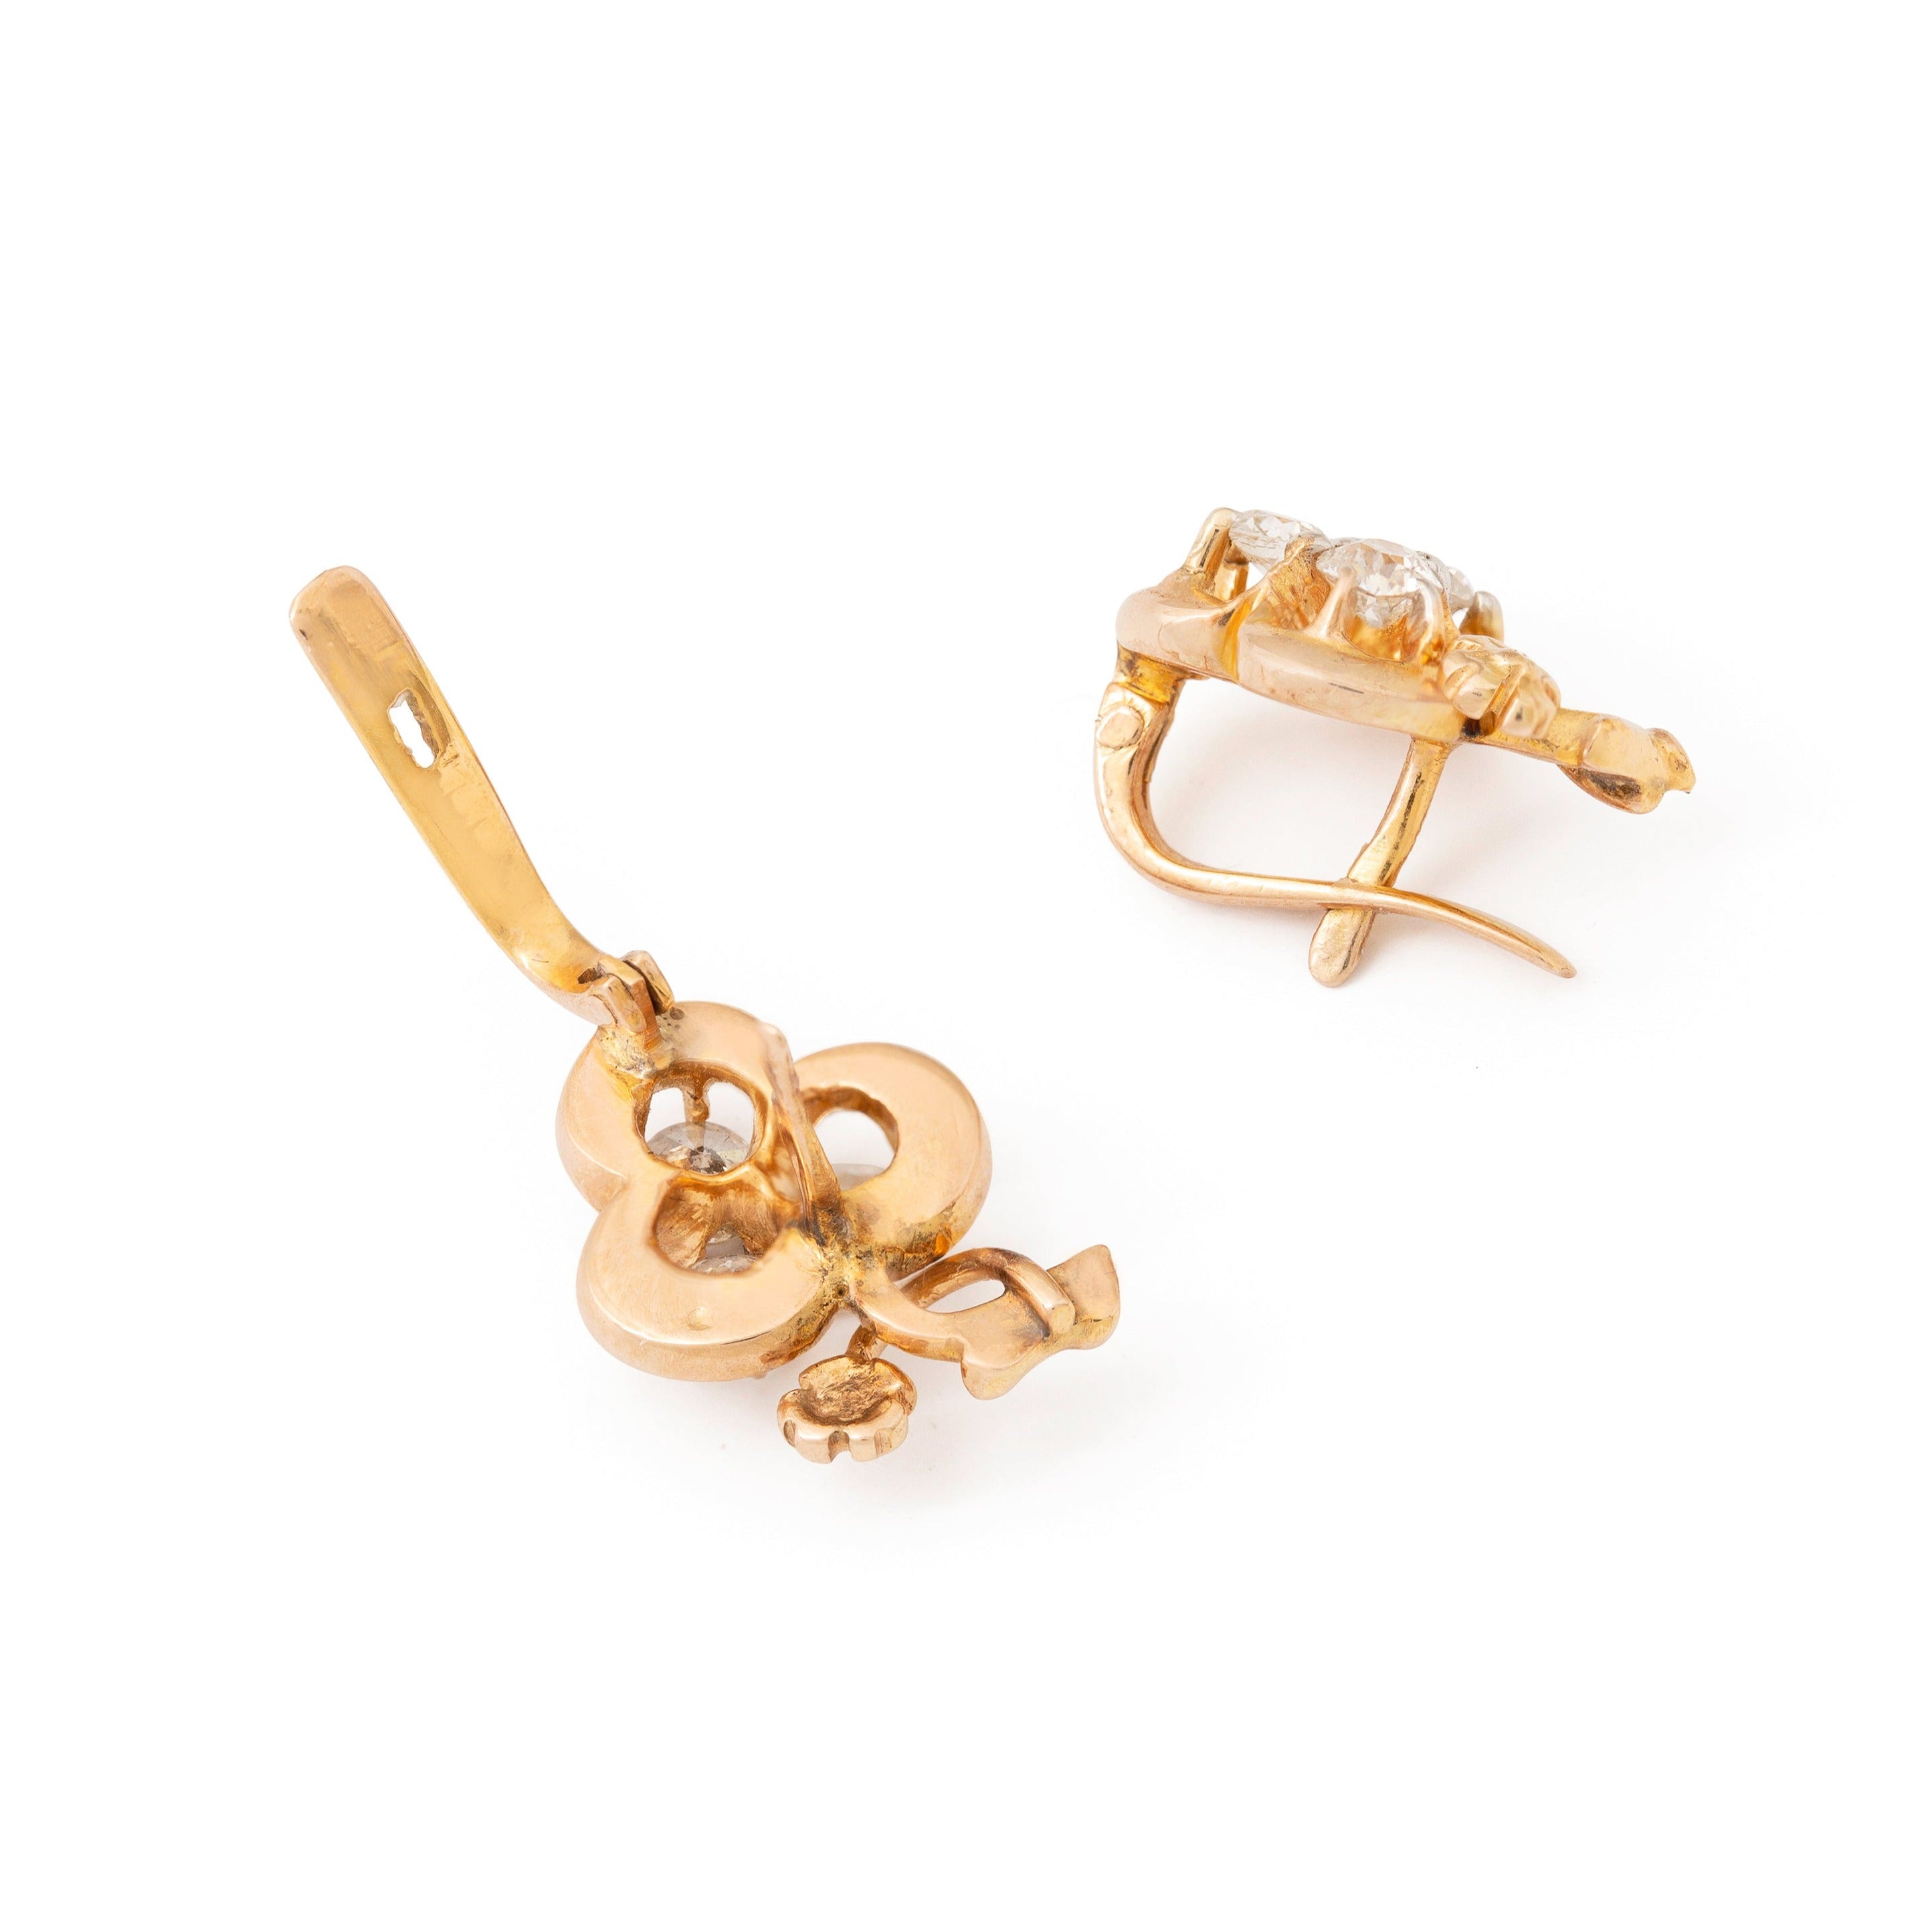 Victorian Diamond and 14k Gold Clover Earrings